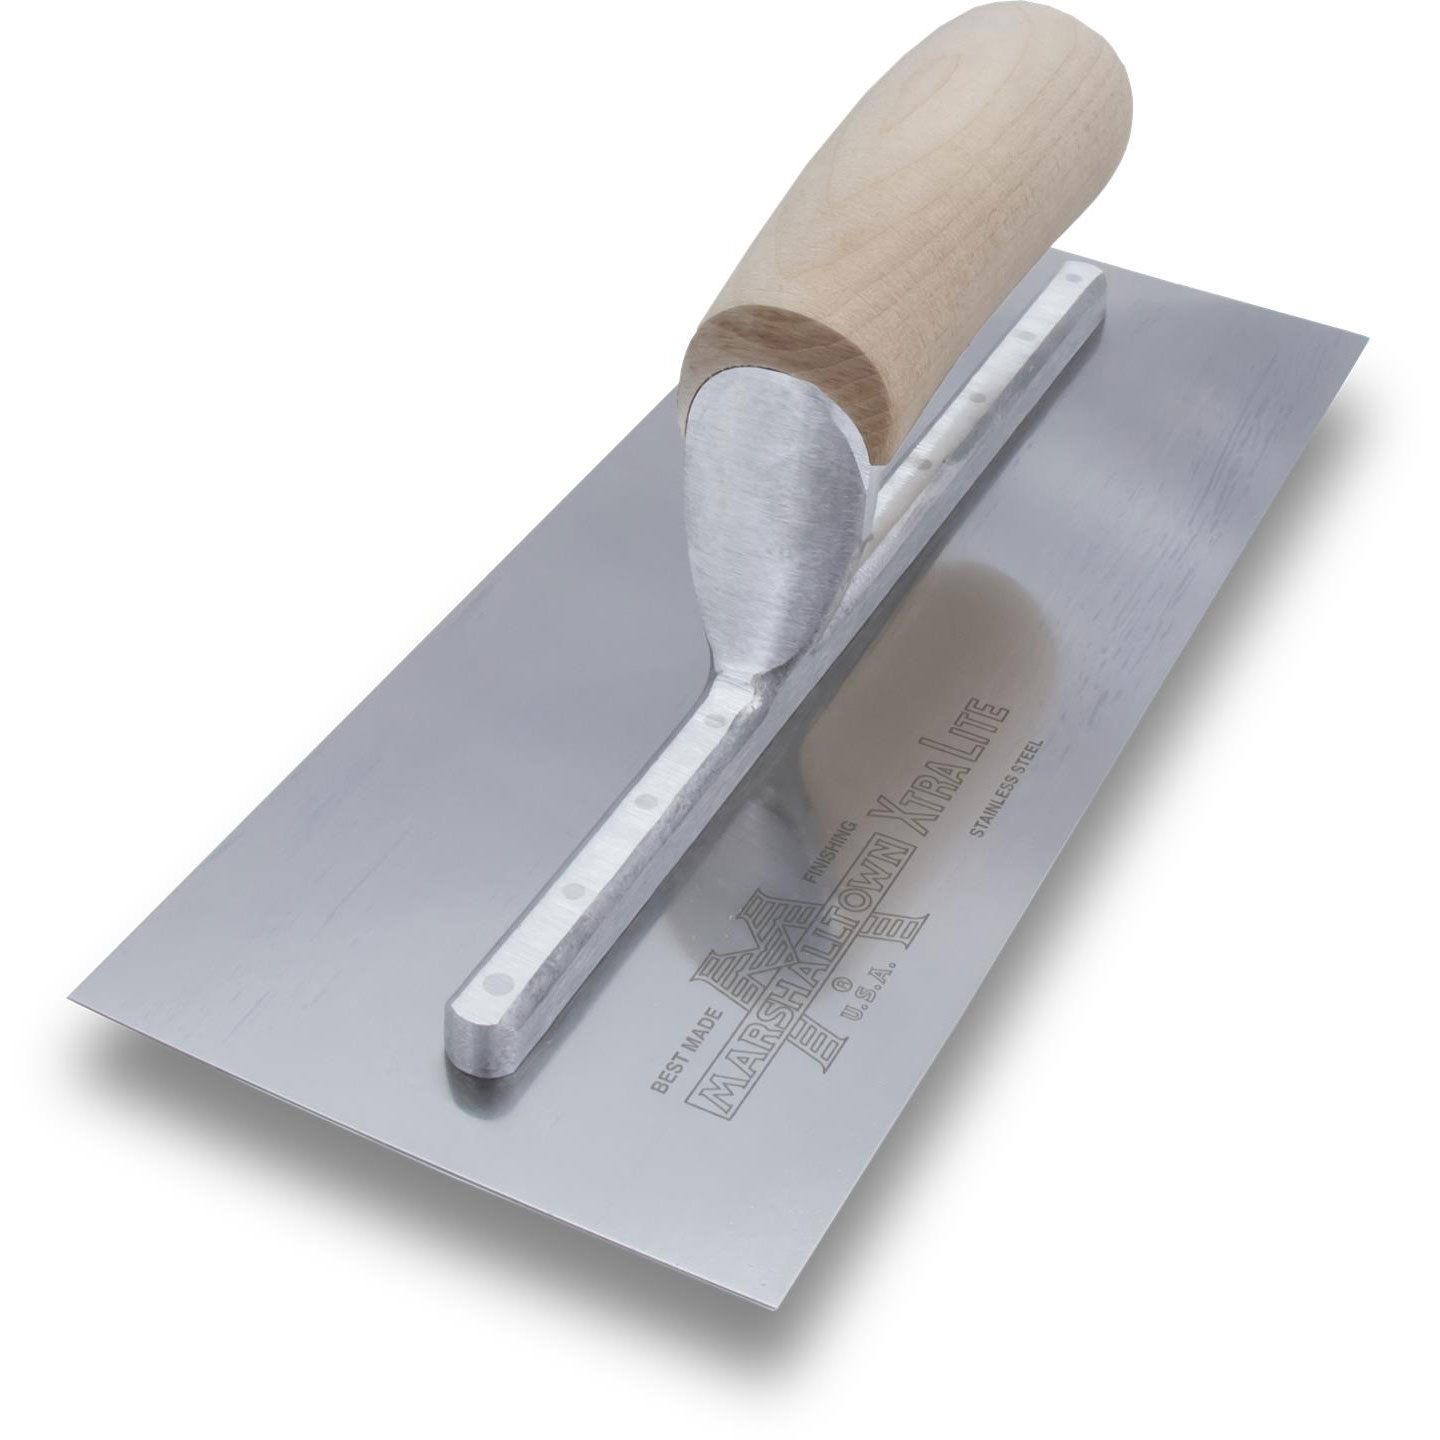 Marshalltown MXS13SS 13in x 5in Stainless Finishing Trowel with Curved Wood Handle MXS13SS